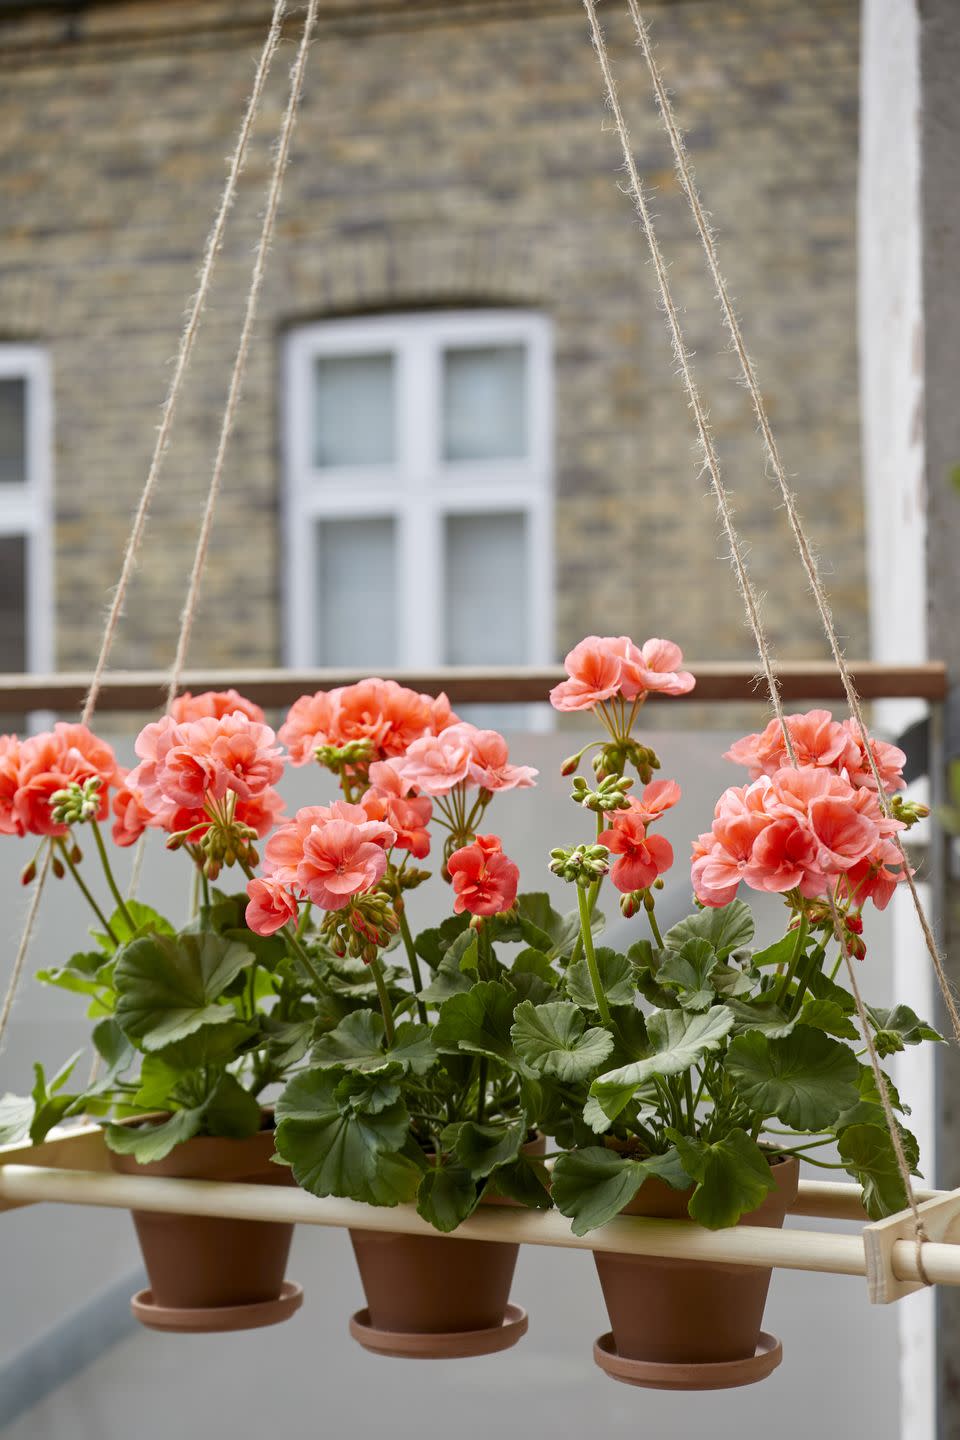 <p>Create a beautiful balcony display with a hanging planter filled with geraniums. All you need is upright or trailing geraniums, terracotta pots with saucers, glue, rope and two round wooden poles and connecting pieces.</p>